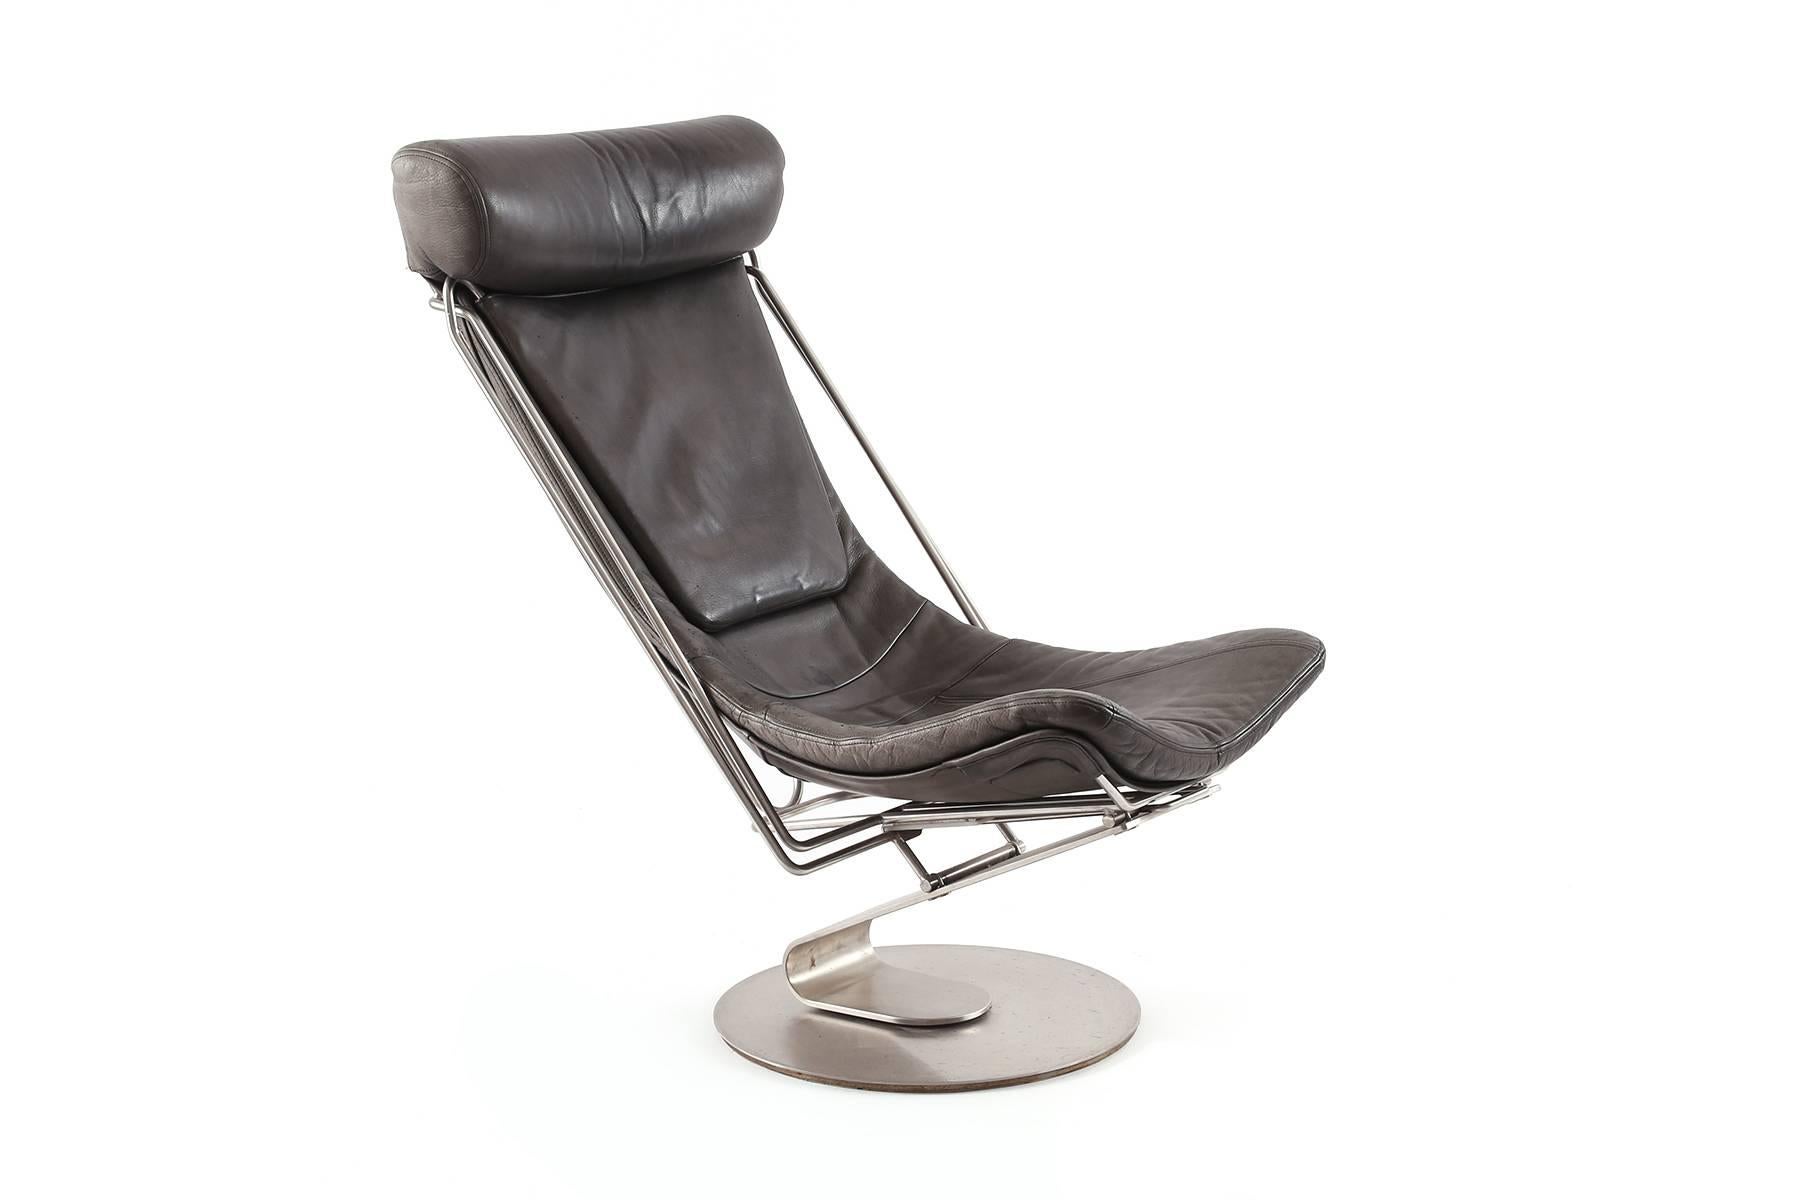 Cantilevered steel and leather chair and chaise from Denmark. This all original example cleverly converts from a chair to a chaise. The back cushion and chrome arms easily pull down and become the footrest! Ingenious and beautiful. As a chair the